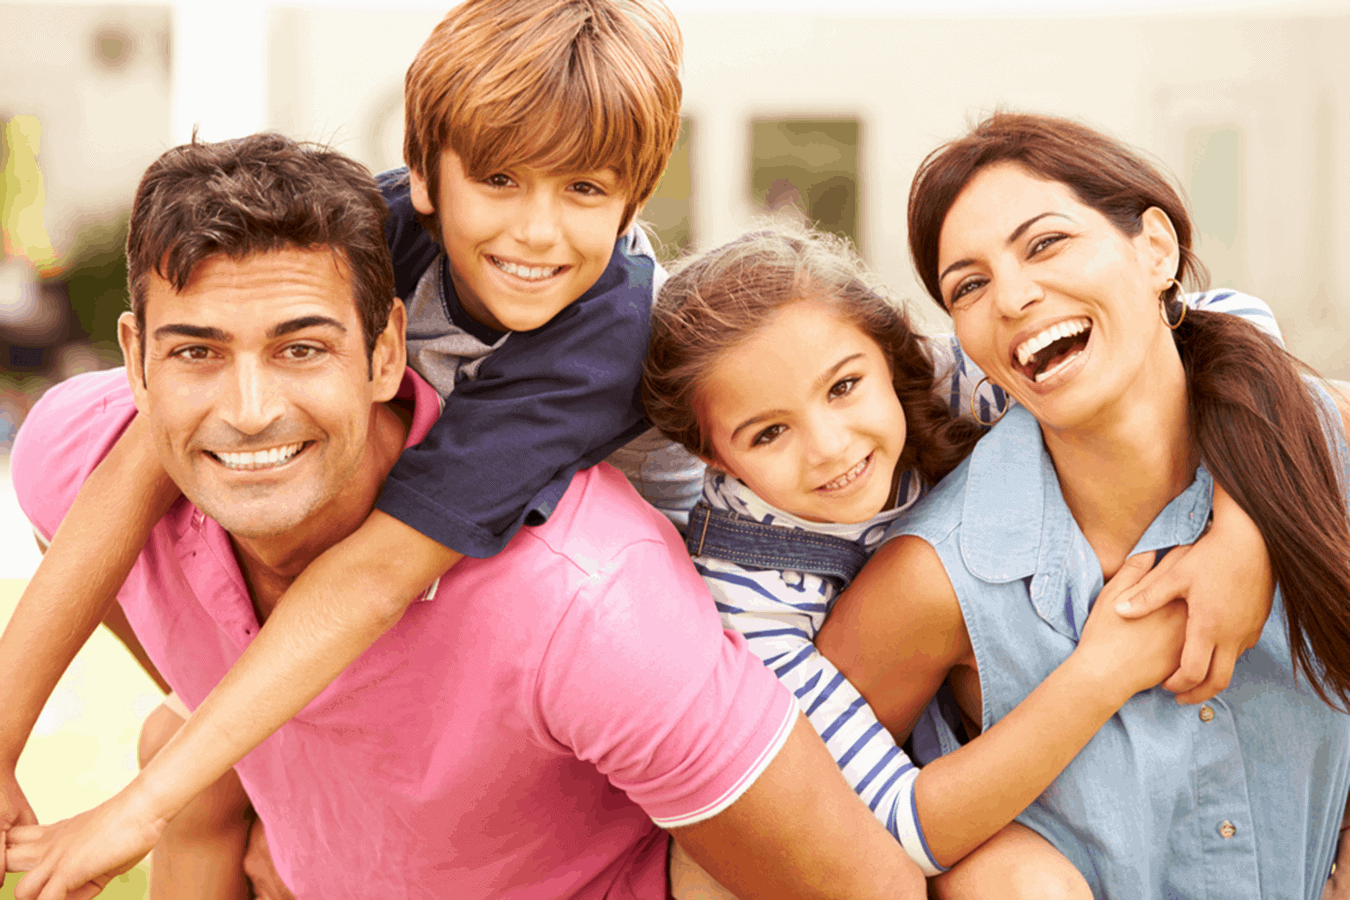 five considerations when choosing a family dentist